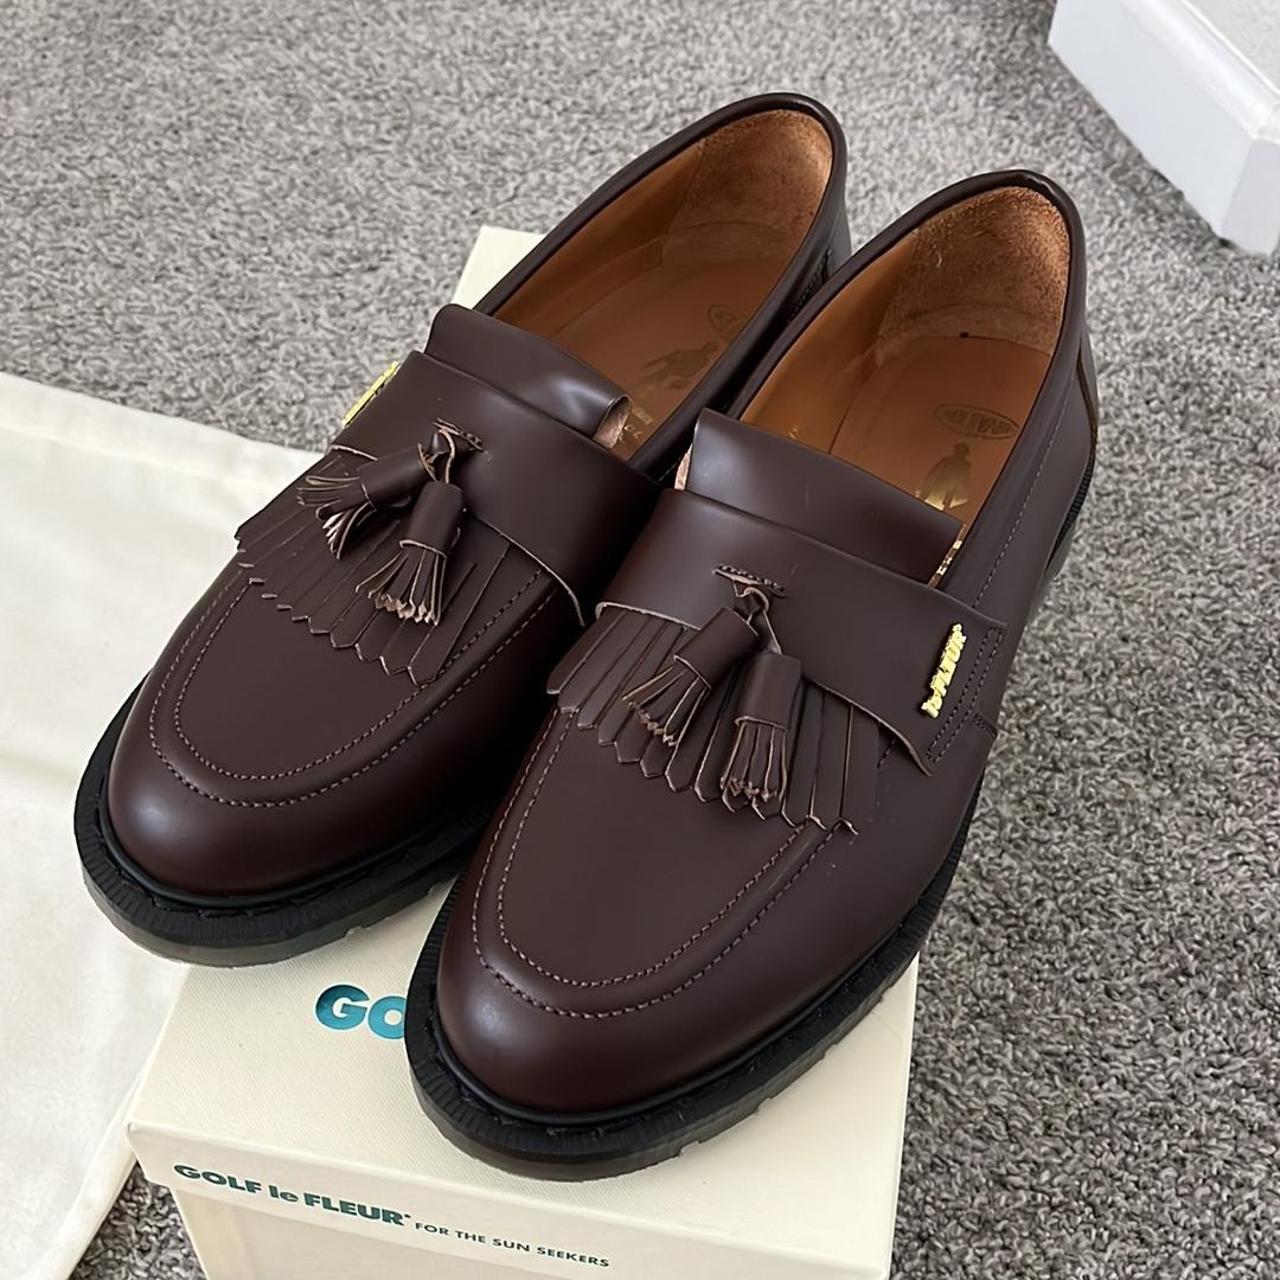 These Chocolate Brown Tassel Loafers by GOLF le... - Depop